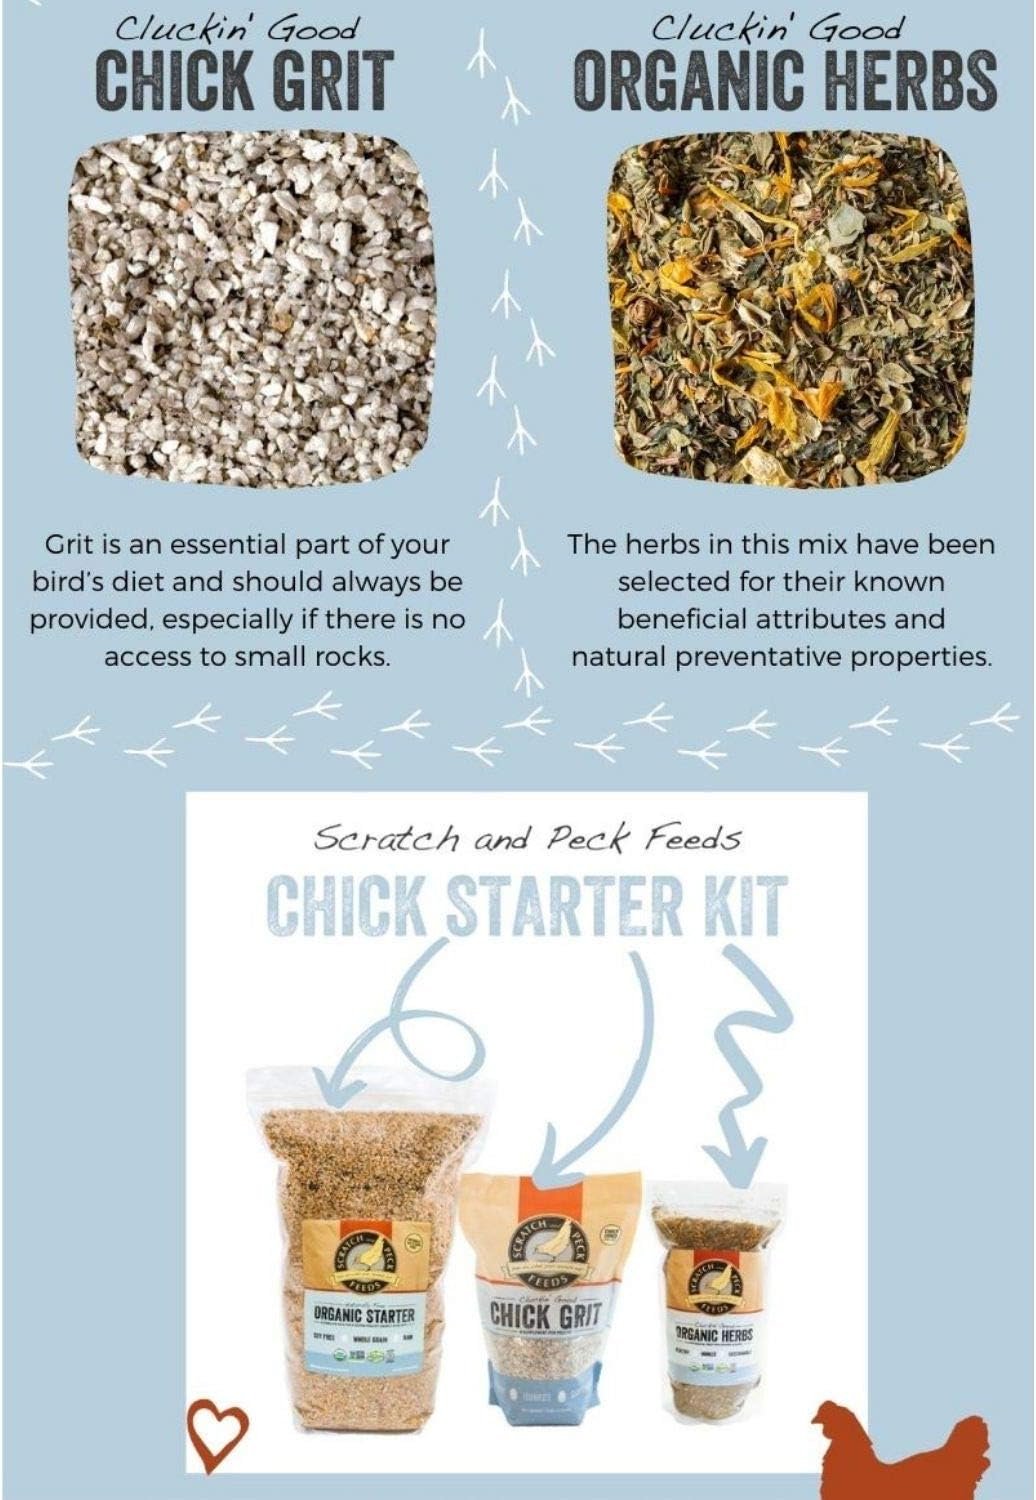 Scratch and Peck Feeds Naturally Free Organic Starter Chick Feed, Chick Grit, and Organic Herbs for Chickens and Ducks - Non-GMO Project Verified, Soy Free and Corn Free